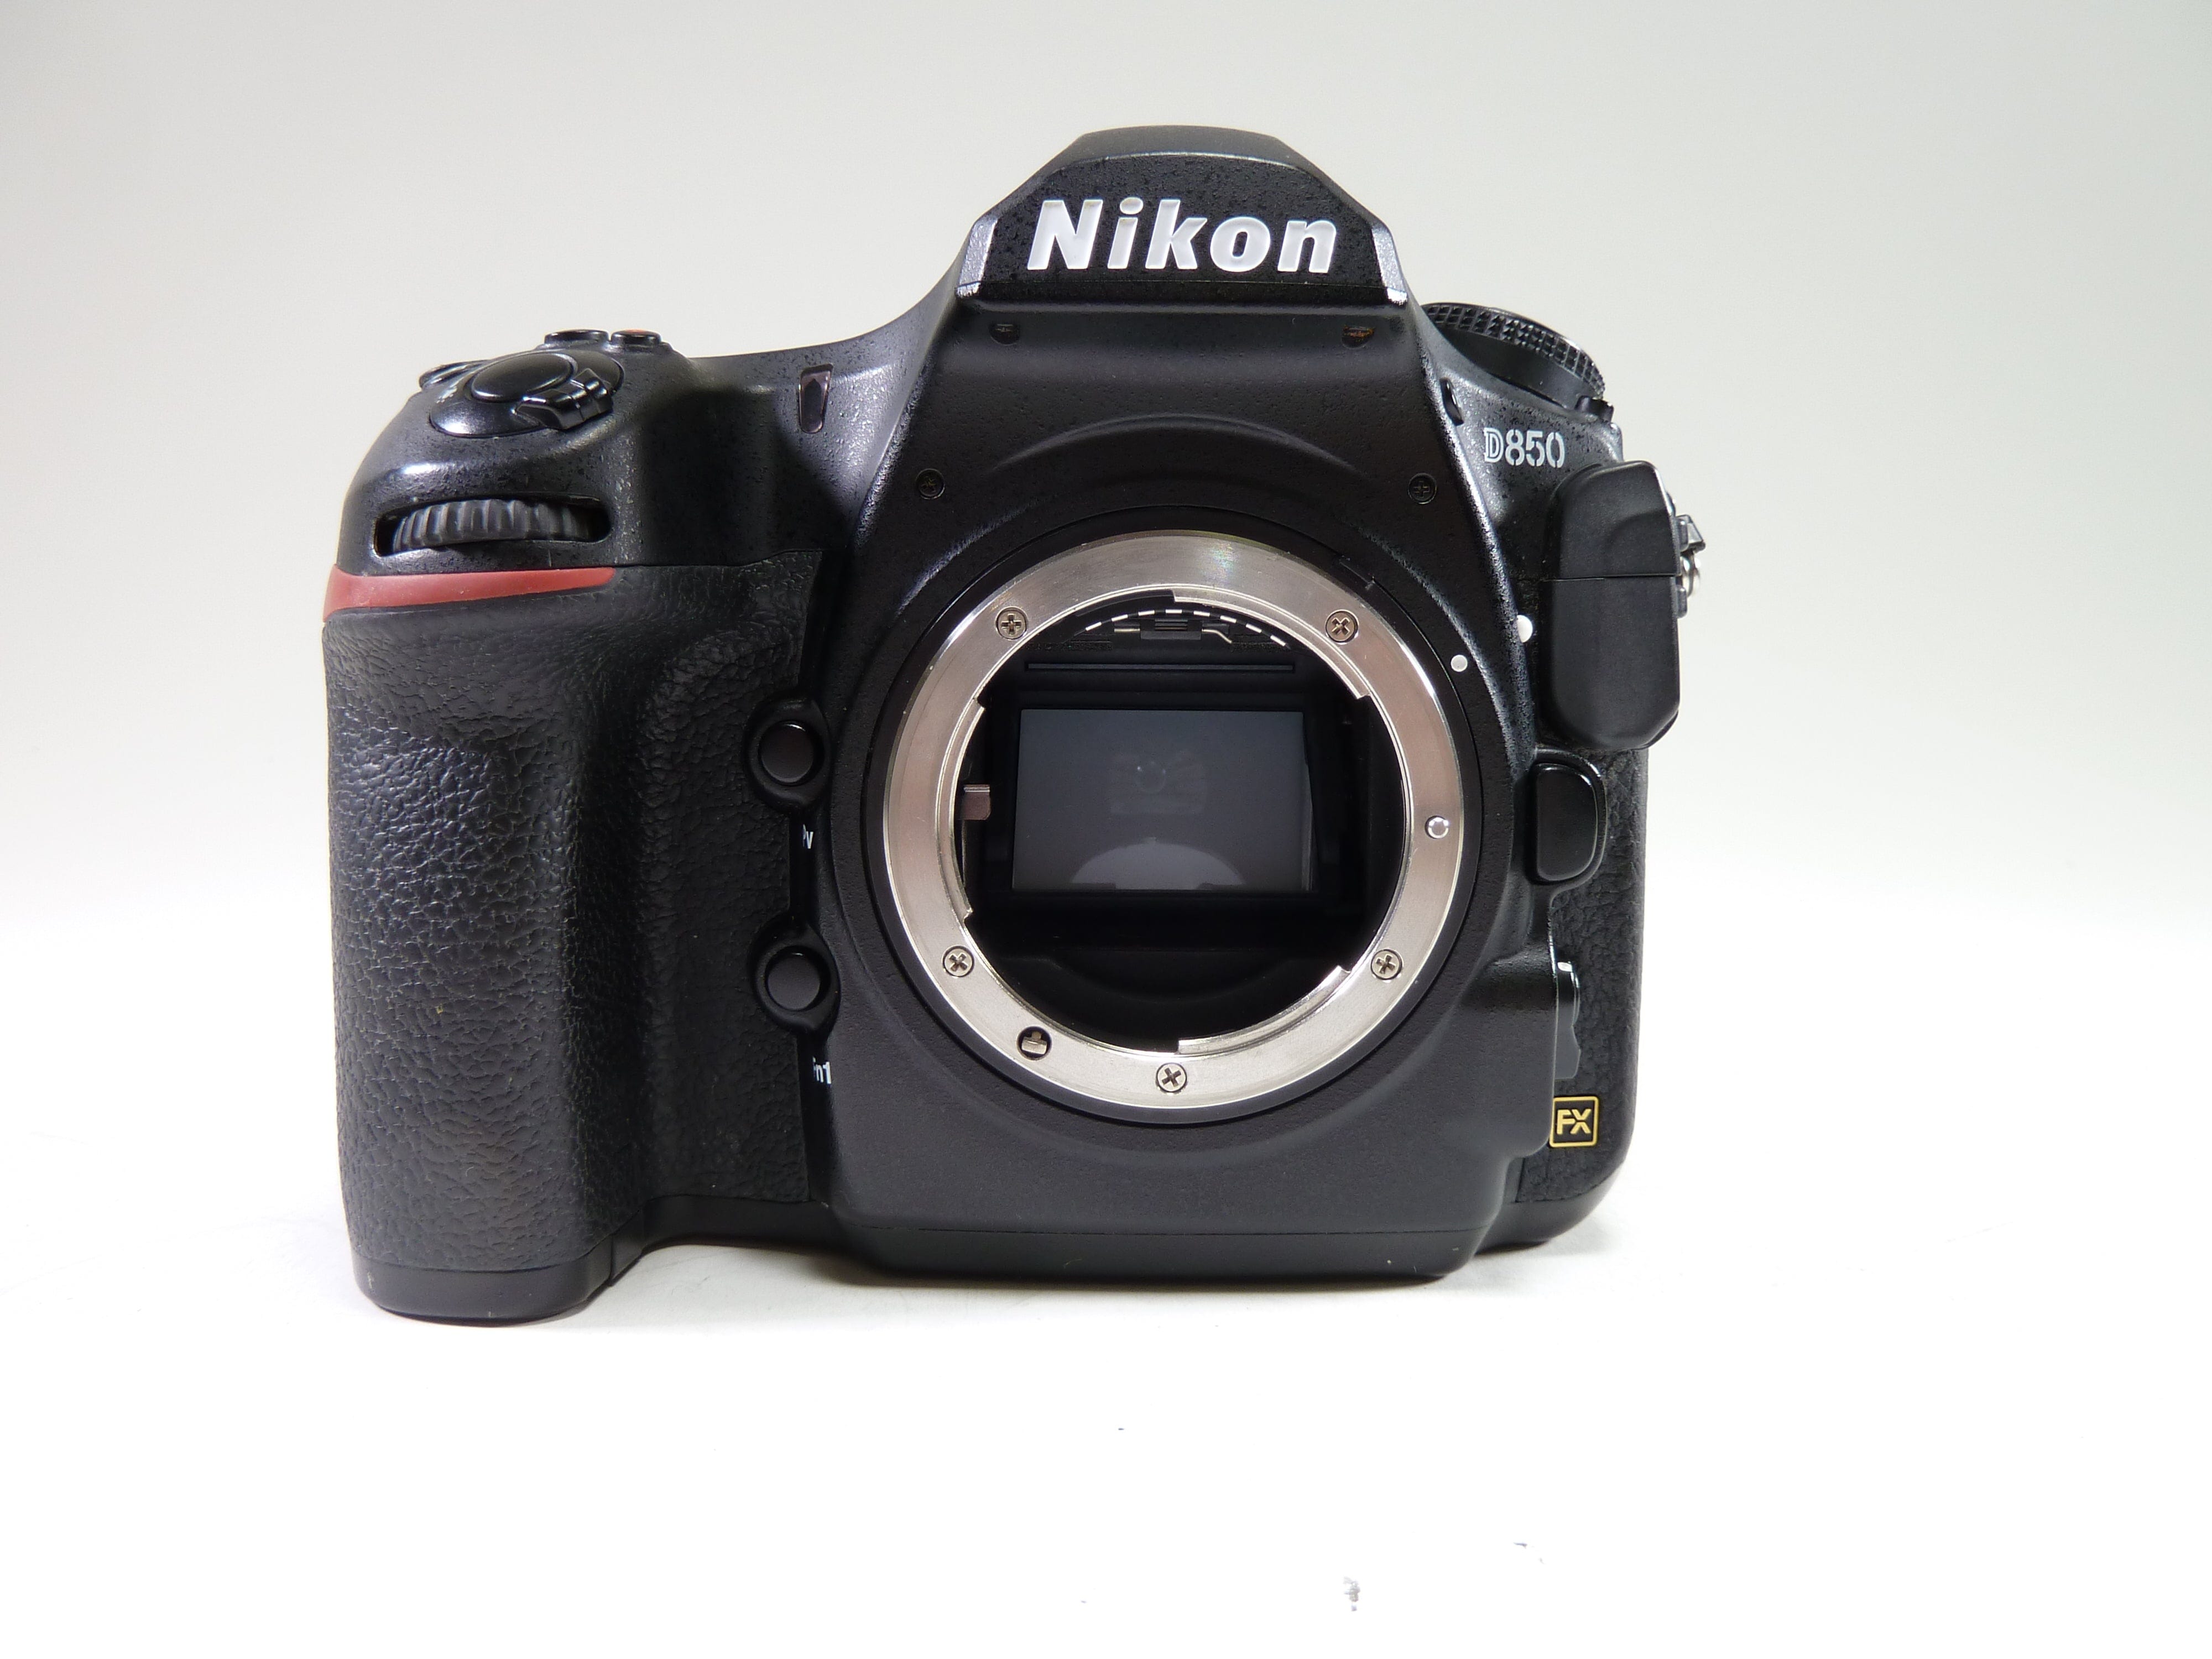 Nikon D850 Body with a Shutter Count of 112,165